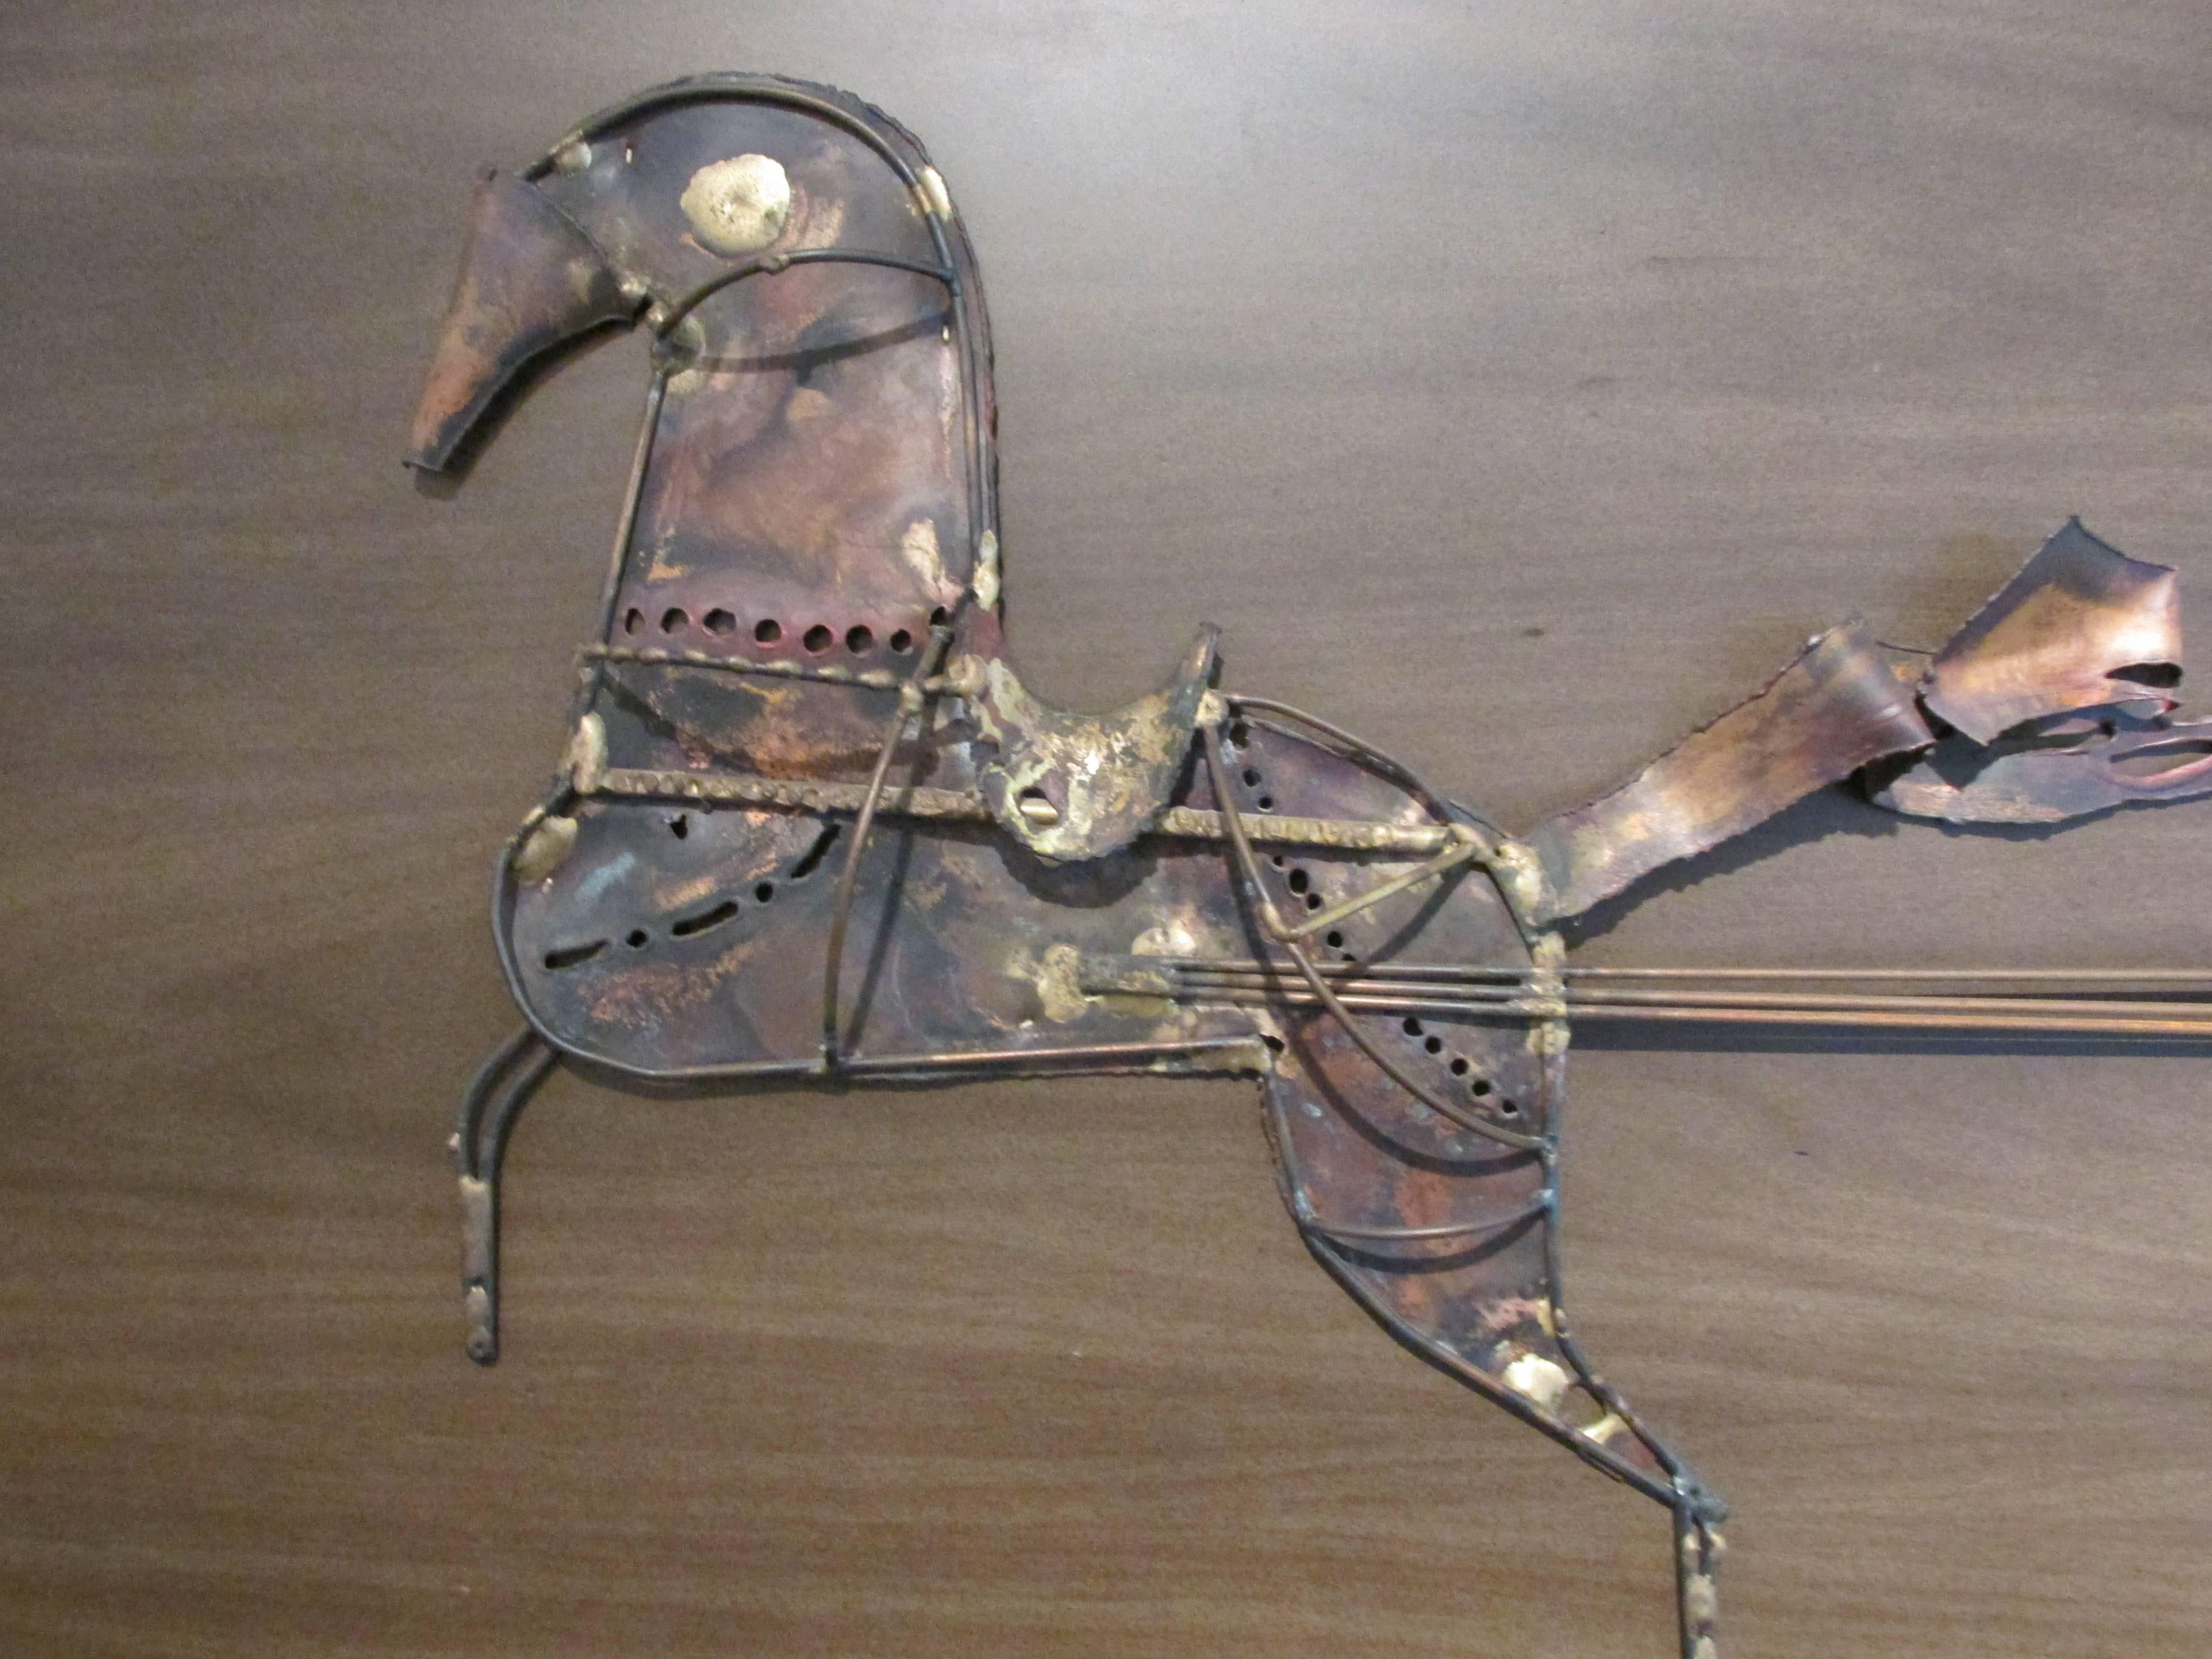 A torch-cut brass and copper wall sculpture mounted to a framed wooden back-plate. Made primarily in copper with some brass and steel components. Depicting a horse, chariot and shield, circa 1970s. Style of Curtis Jere. Large scale wall sculpture